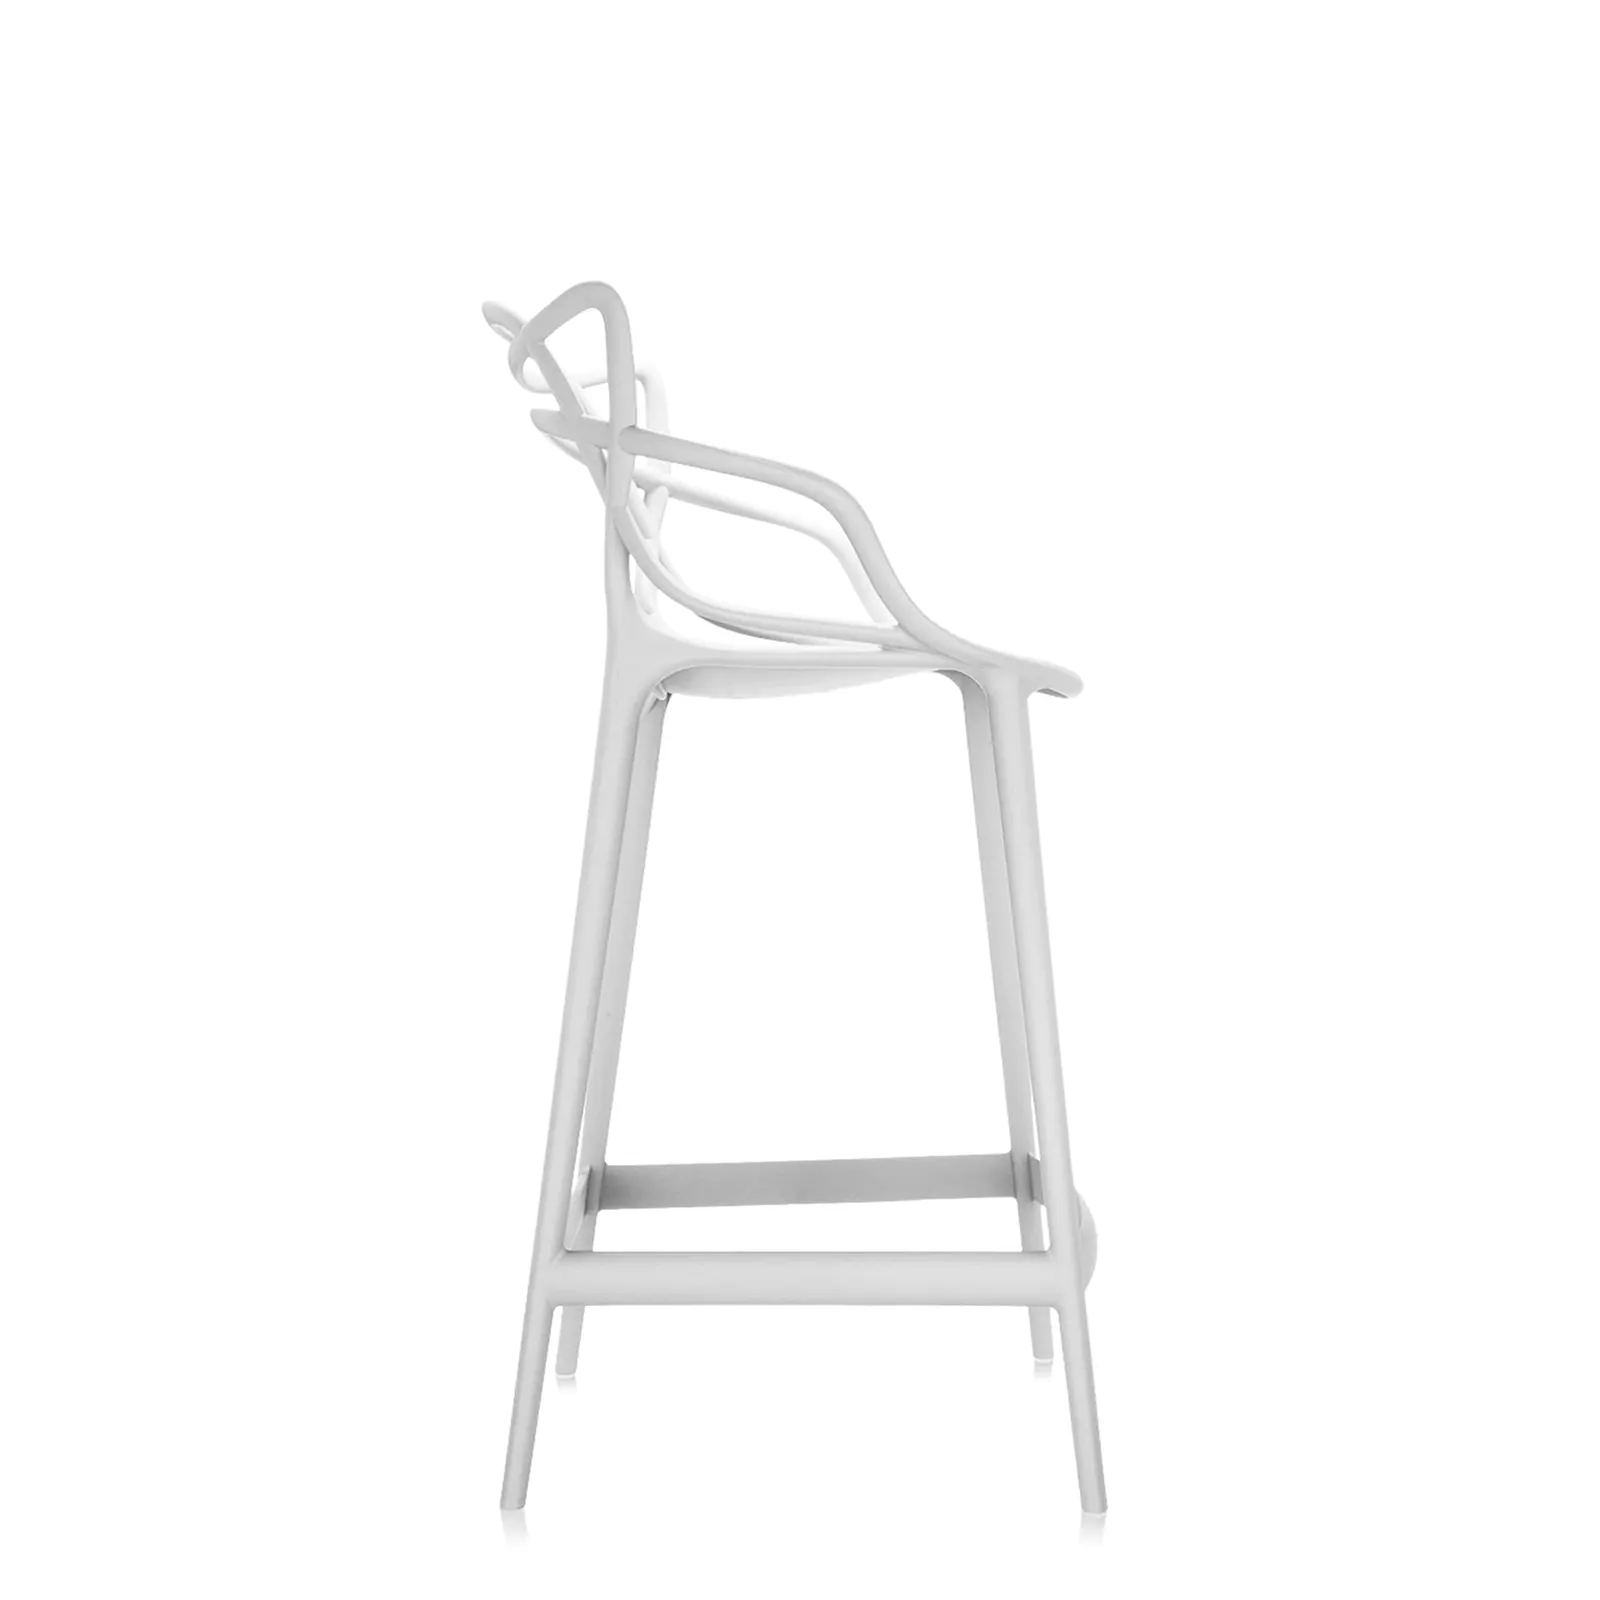 MASTERS STOOL H.75 COLOR BLANCO 05868/03